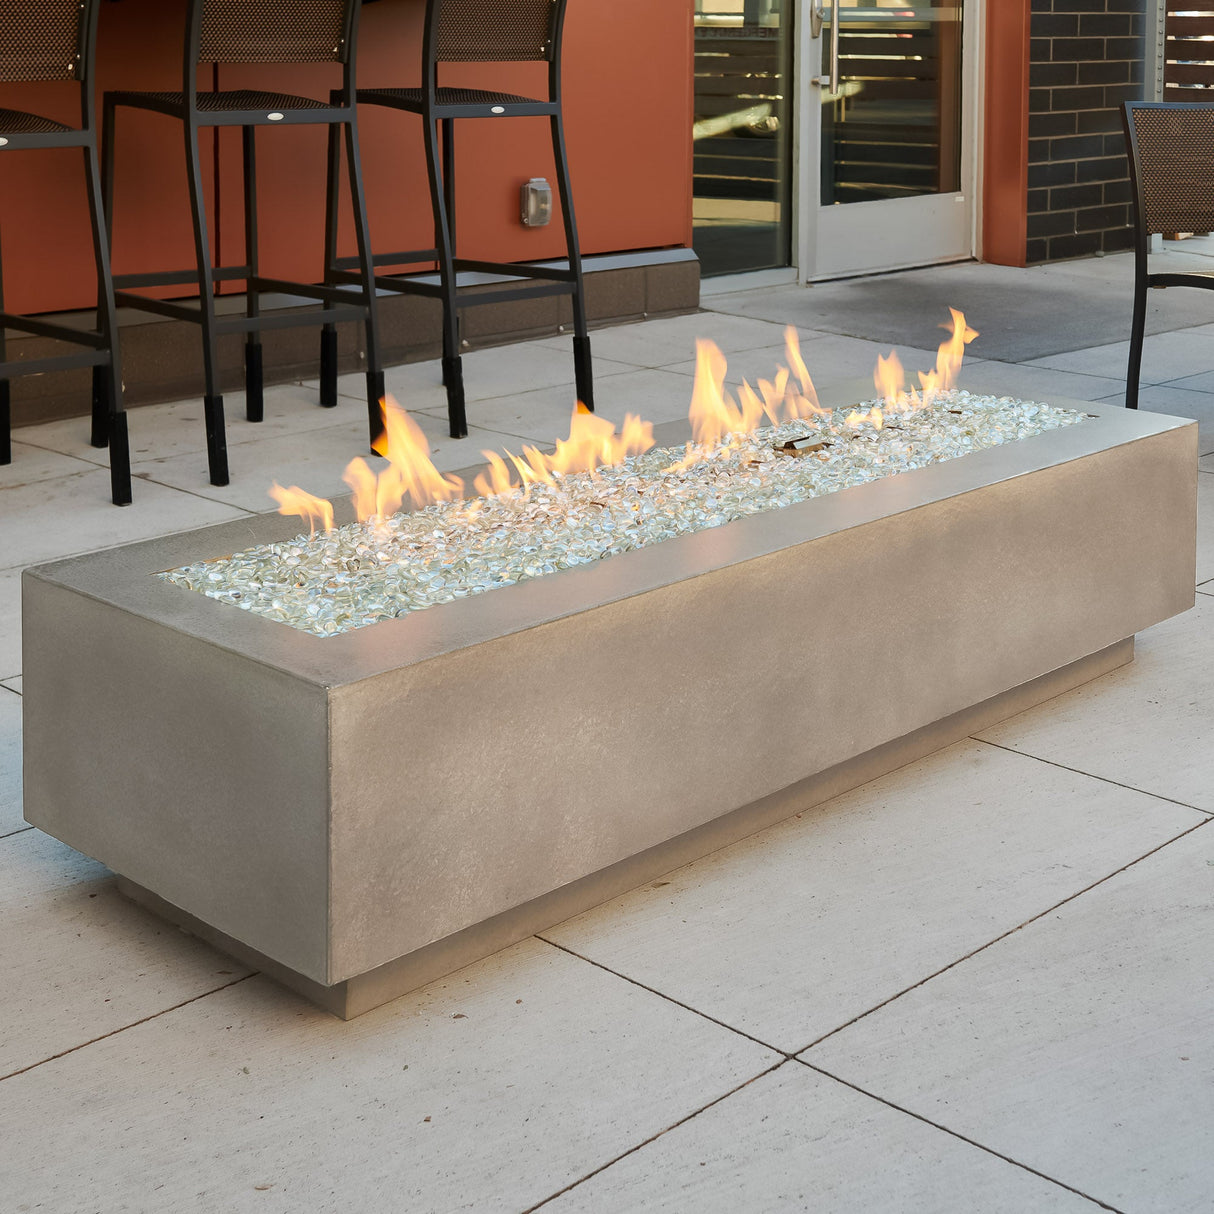 A Natural Grey Cove Linear Gas Fire Pit Table 72" in a commercial space